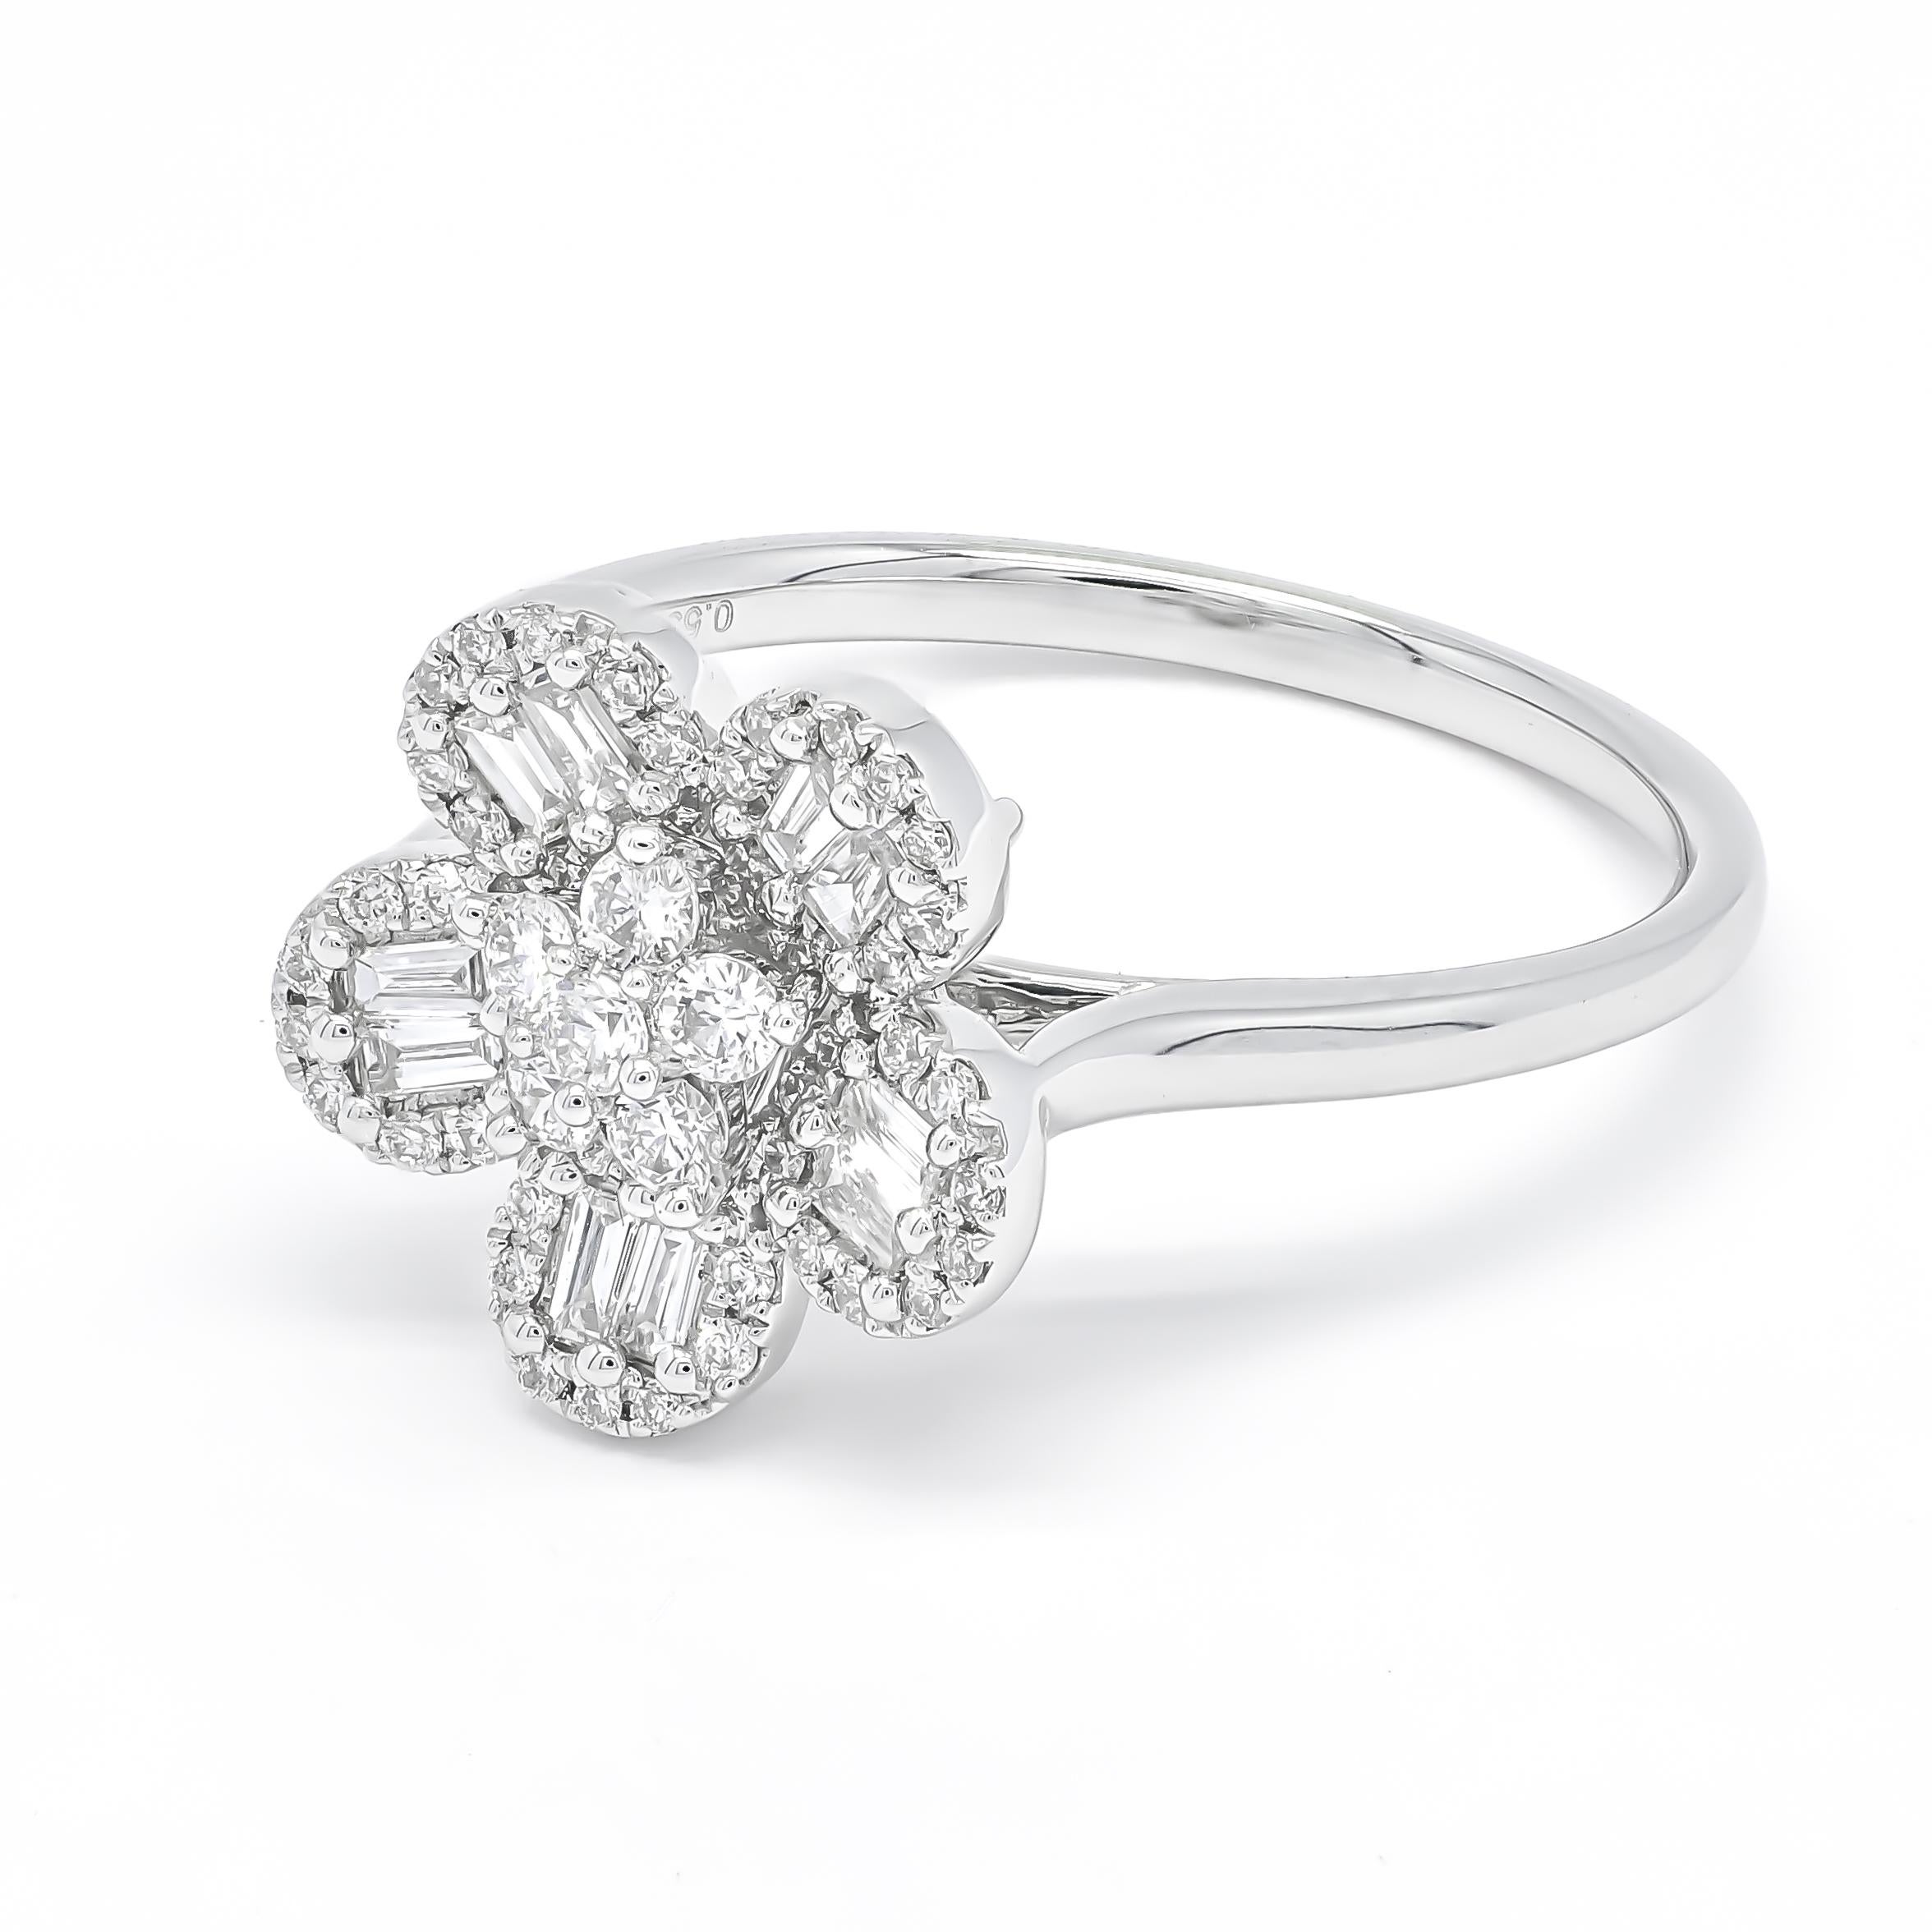 For Sale:  Natural Diamond Ring, 18KT White Gold Statement Ring R072471, Flower Cluster Rin 5